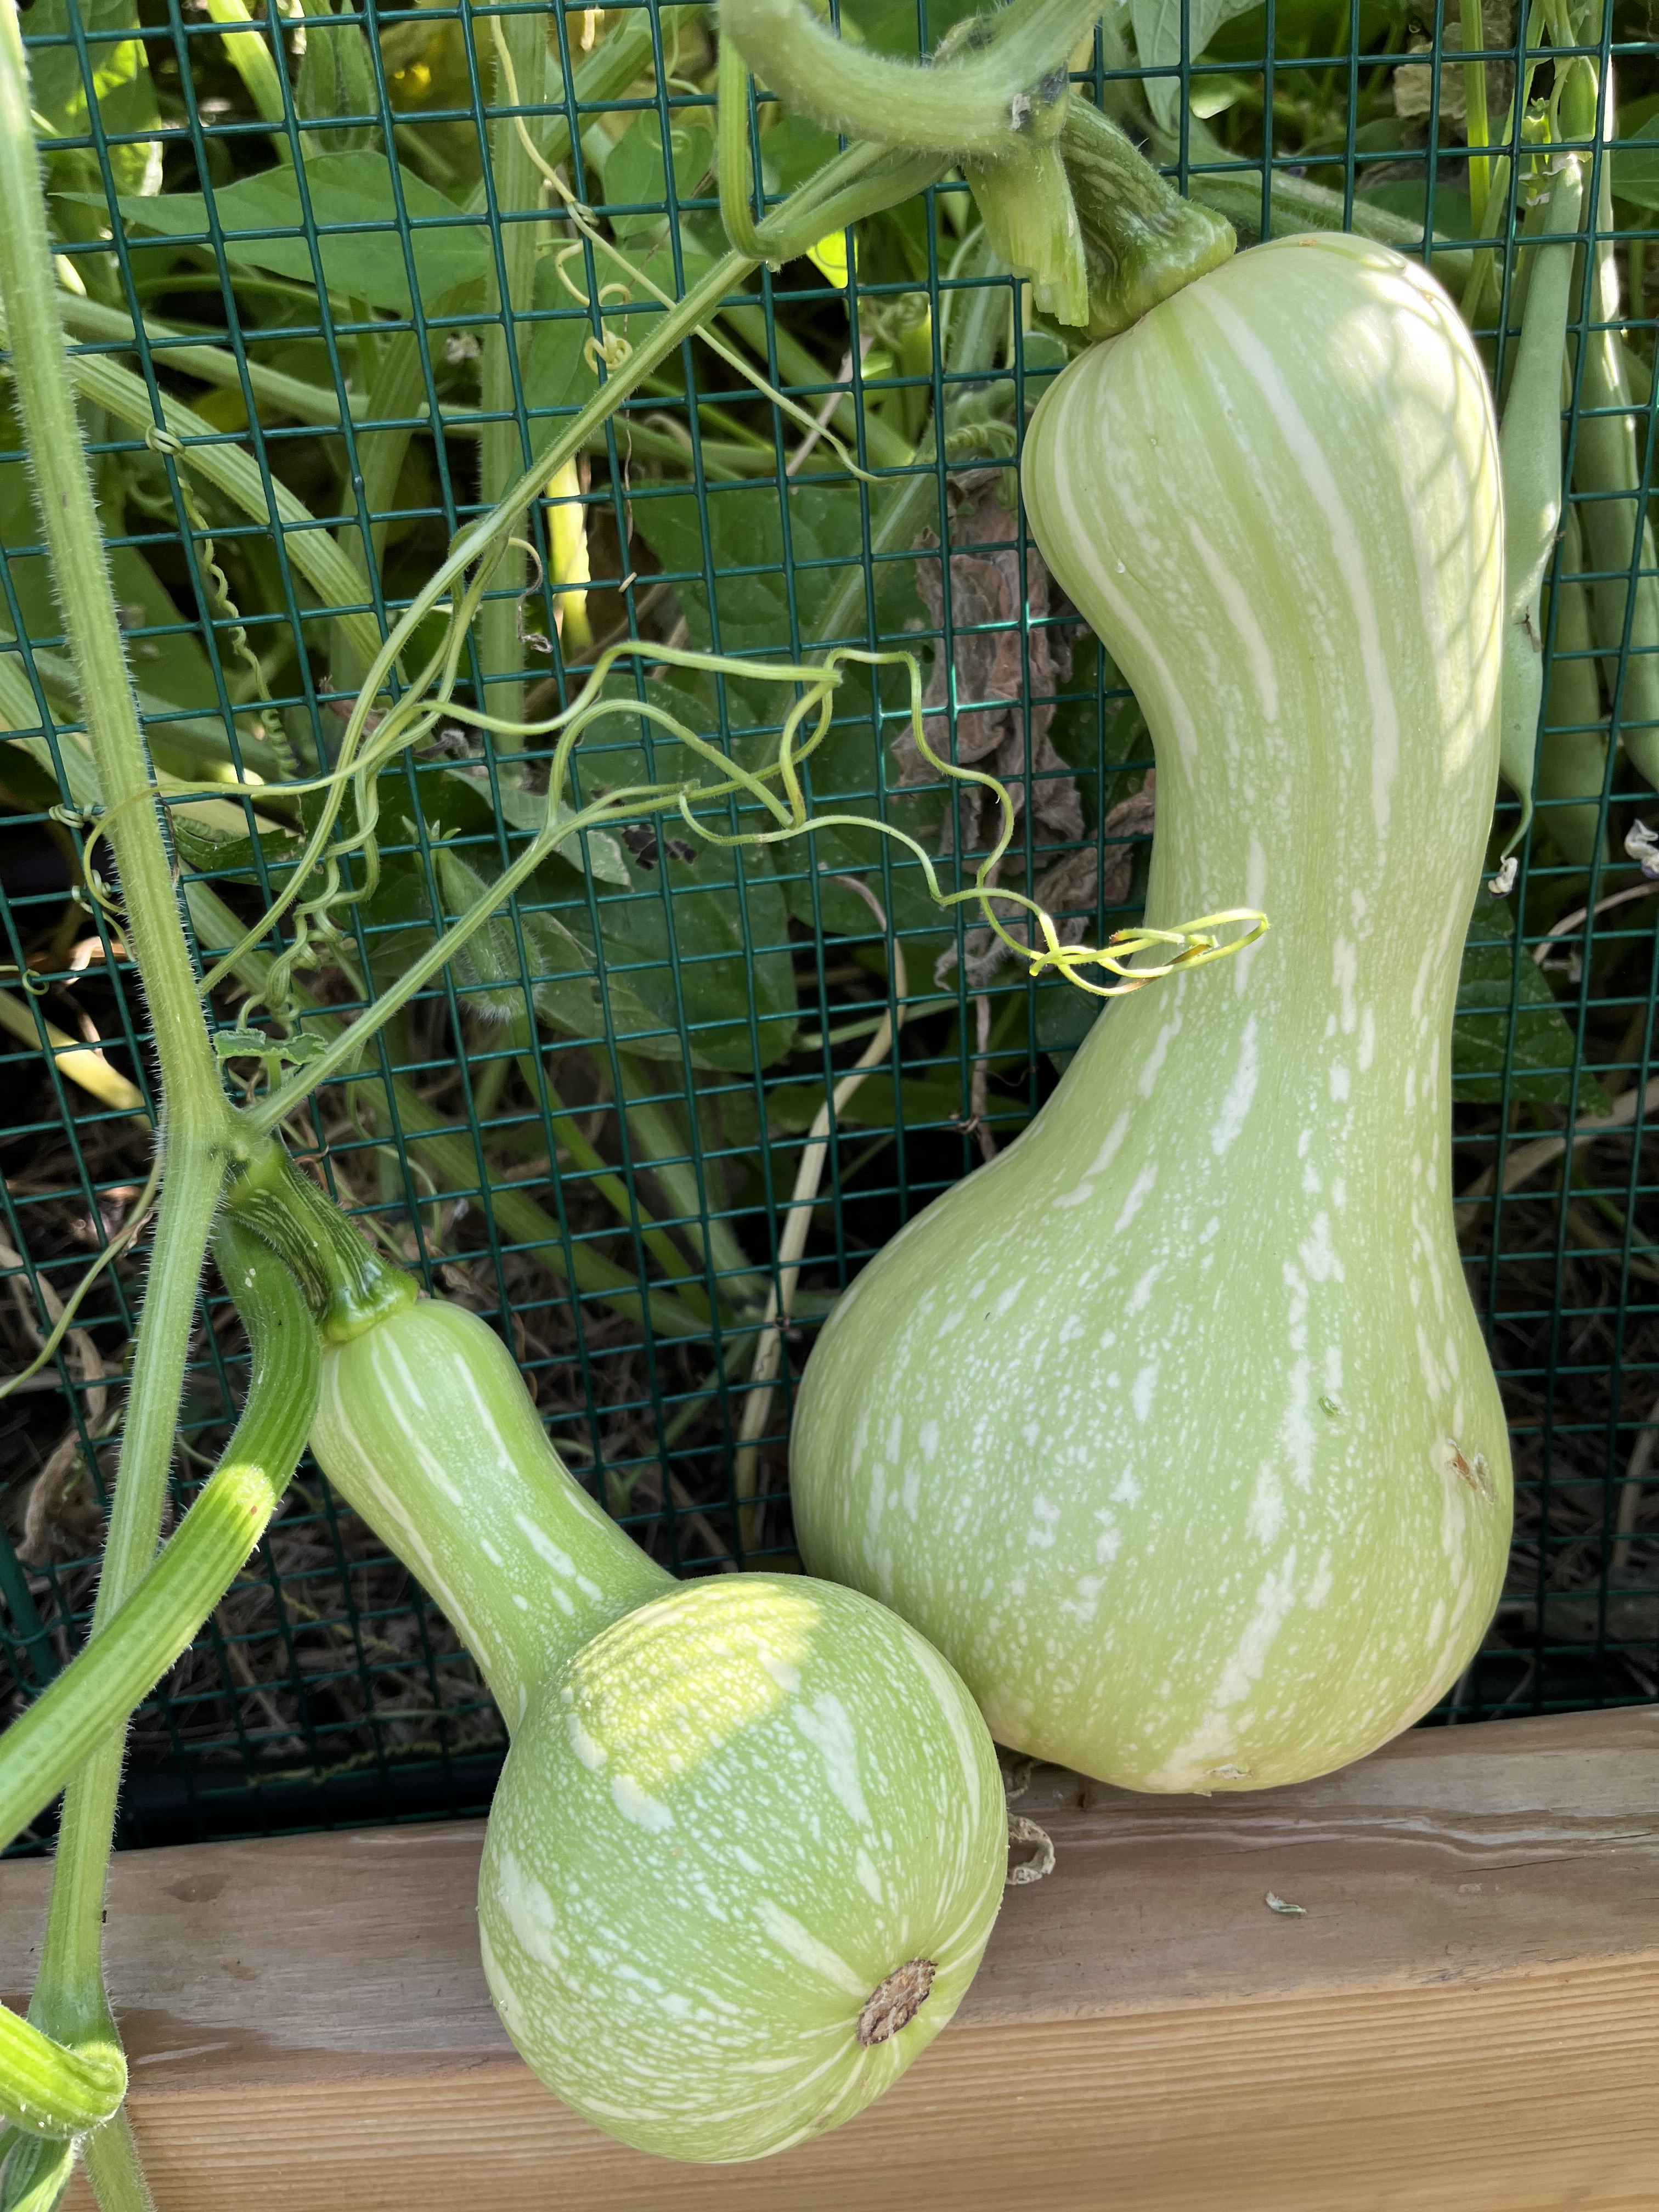 Searching for a Borer Resistant Squash